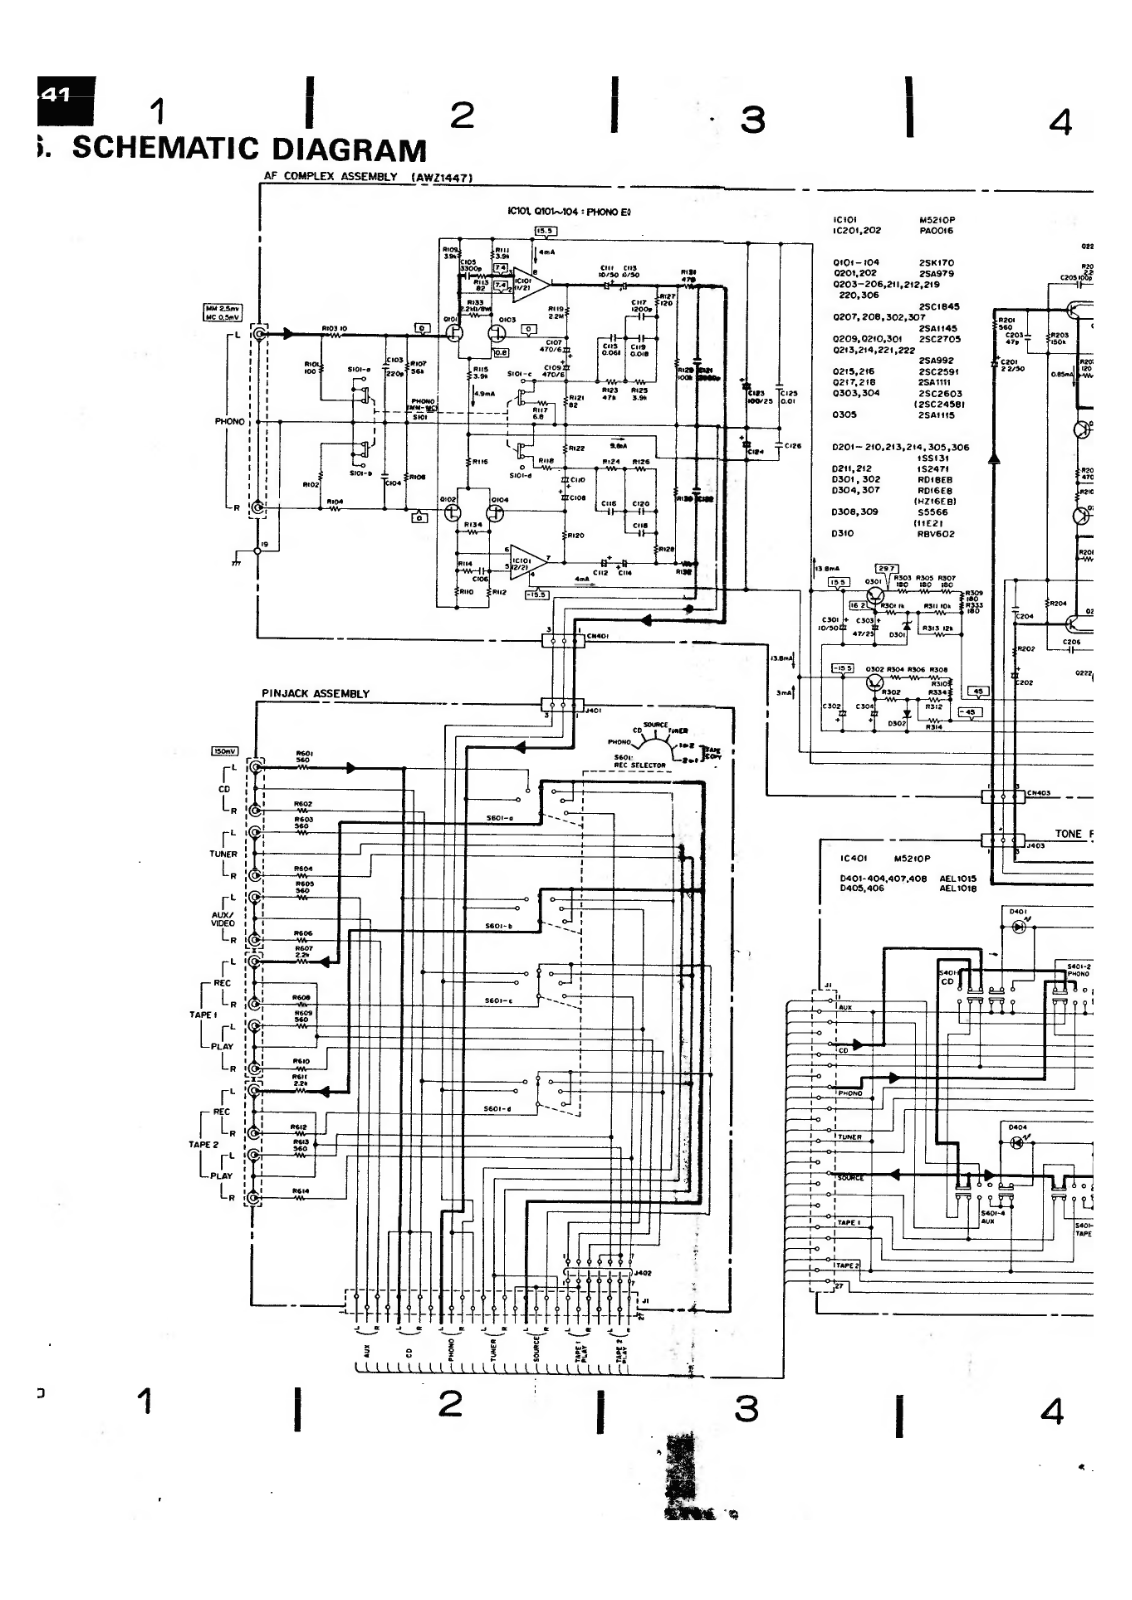 Pioneer A-441 Schematic